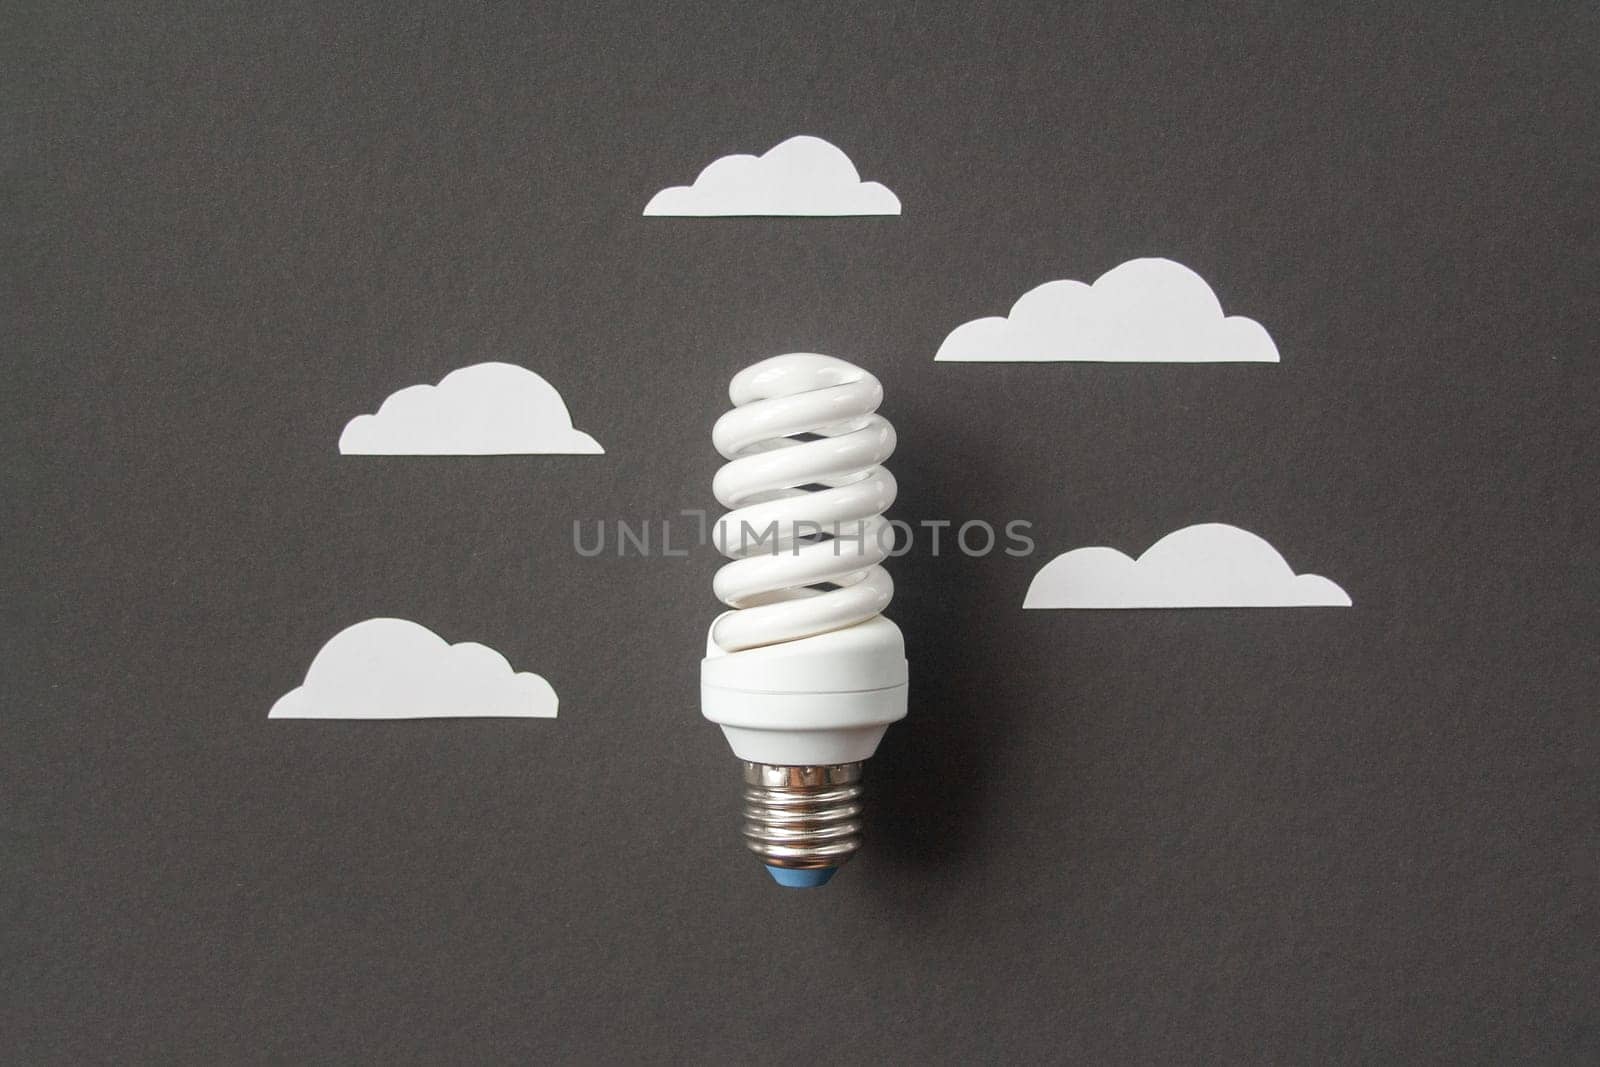 Light bulb with white cut out clouds on black background. Idea concept. Energy and electricity. alternative energy sources. Innovation and thinking out the box symbols. Creativity and inspiration